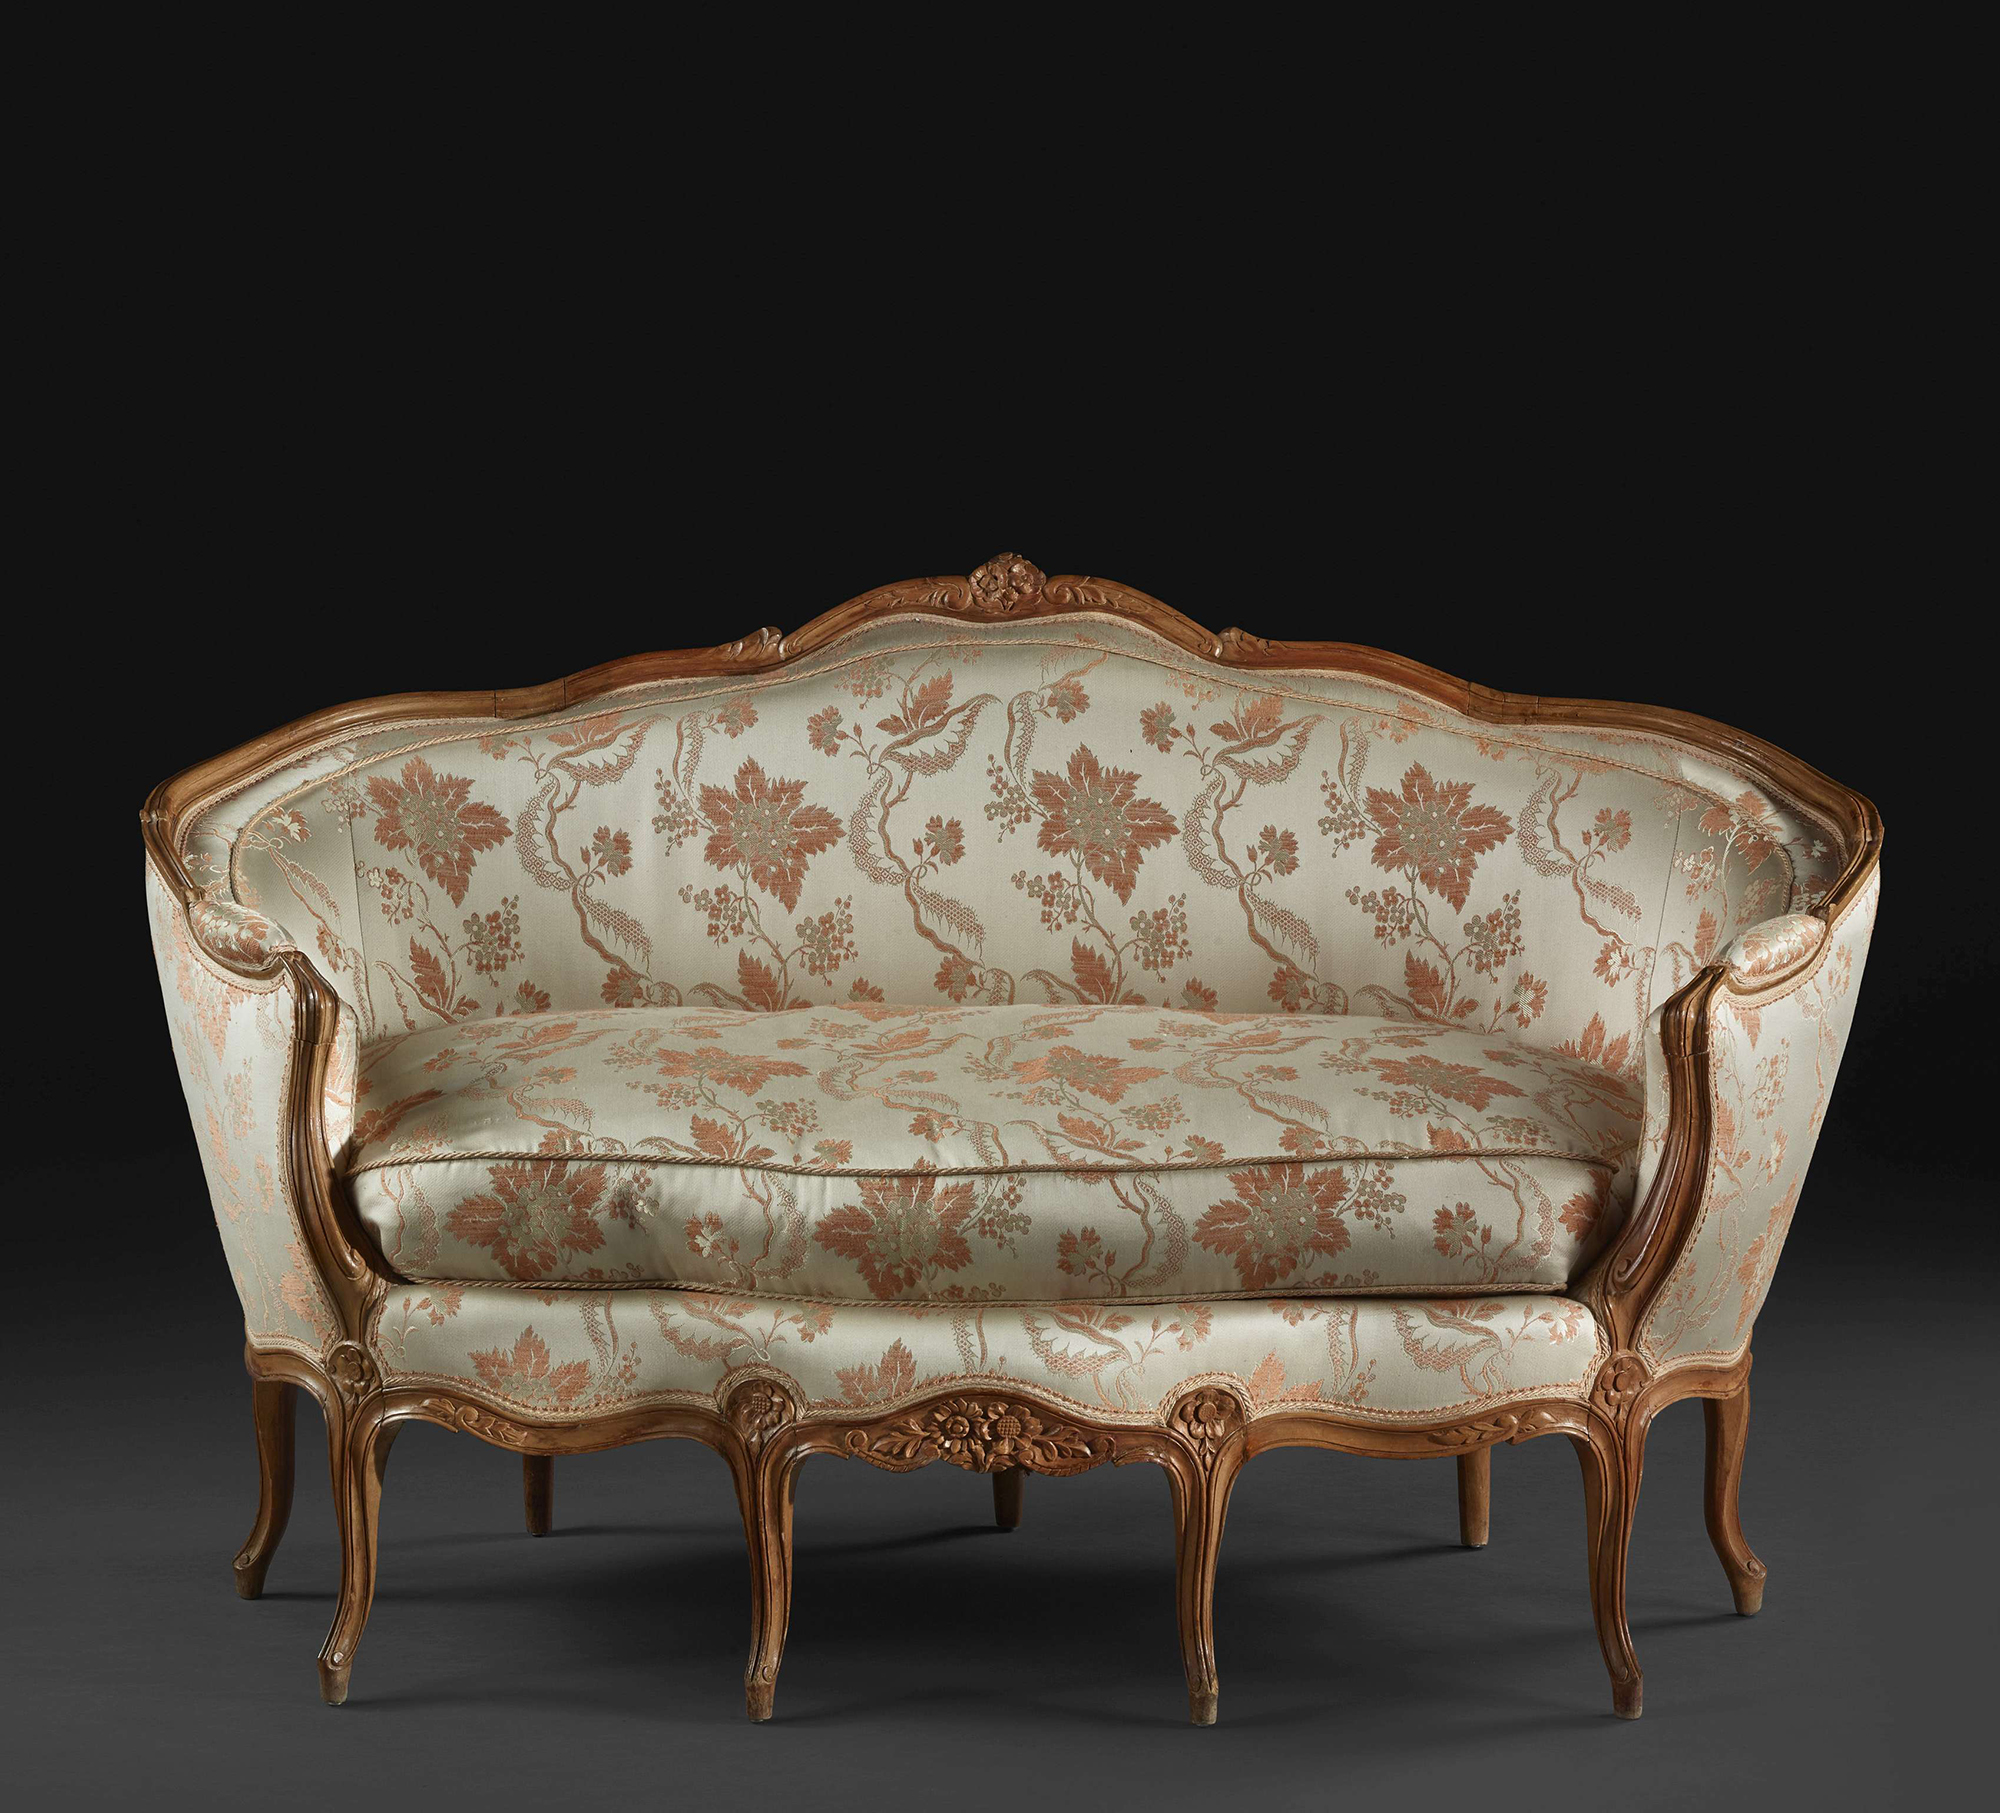 French, Louis XV period petite canapé corbeille